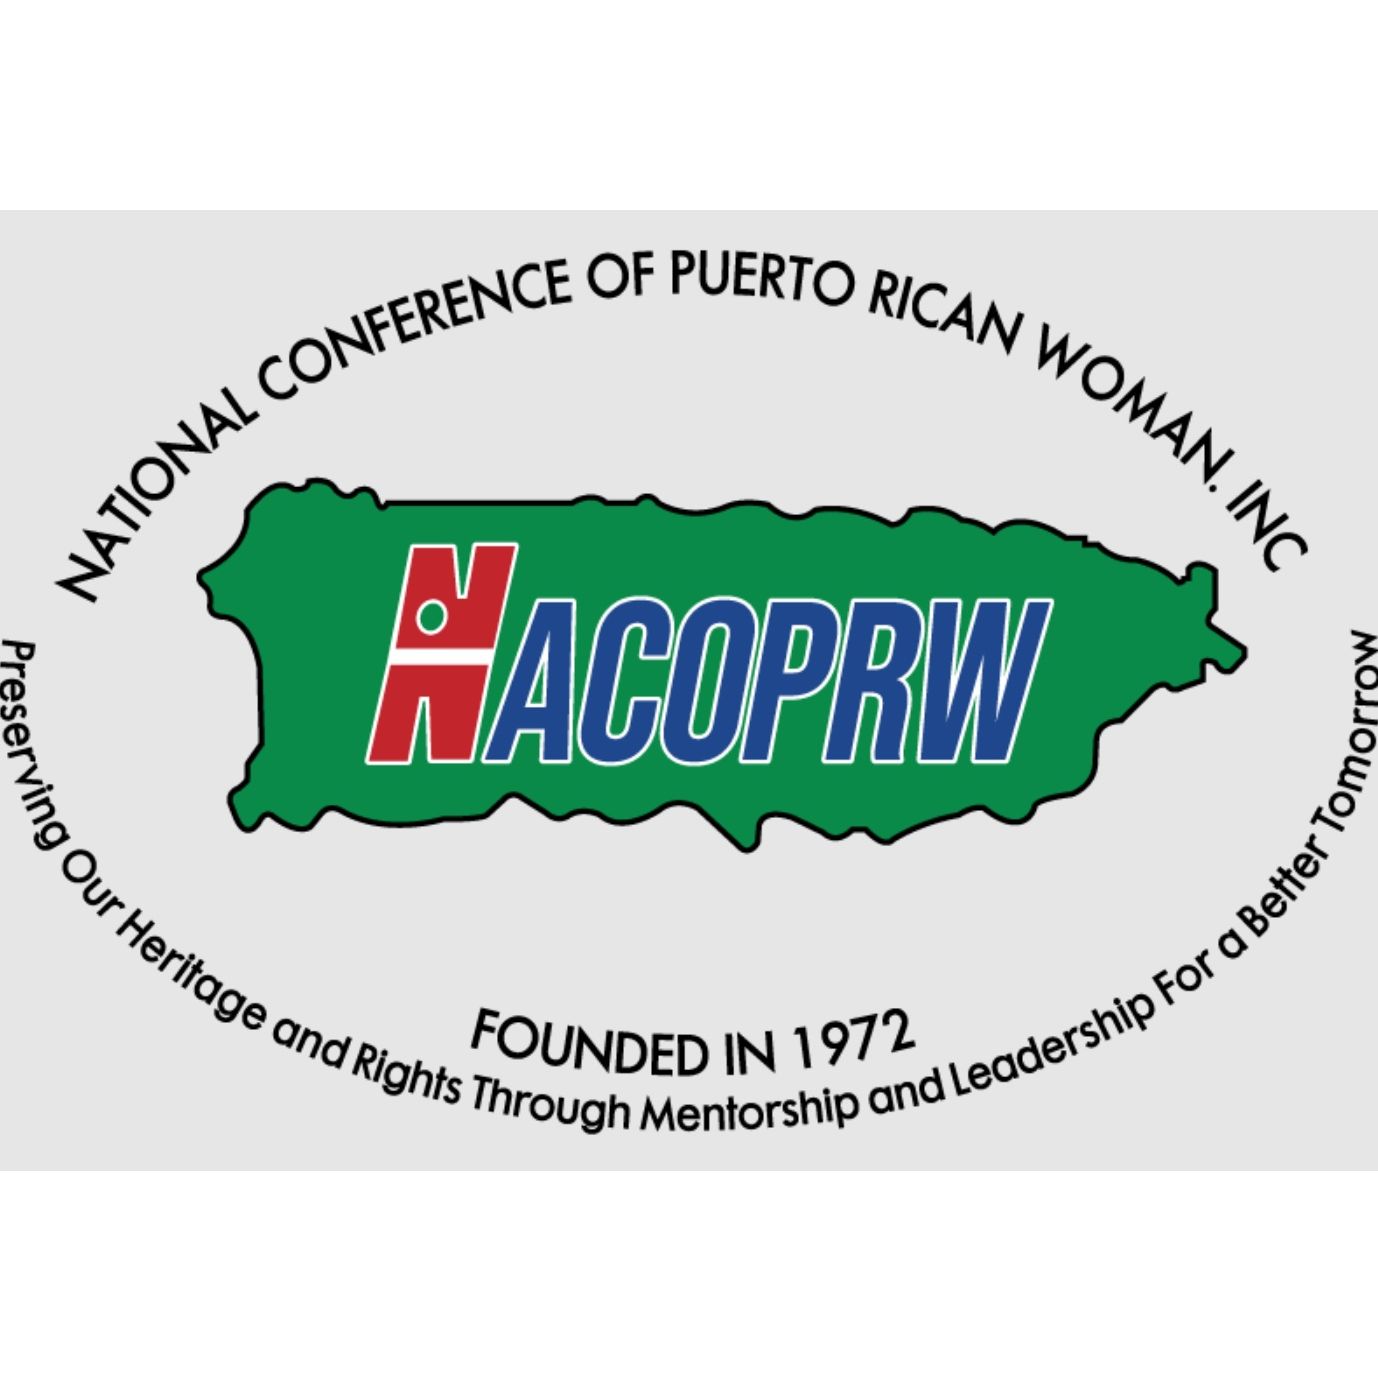 Women Organizations in Chicago Illinois - Chicago Chapter of the National Conference of Puerto Rican Women